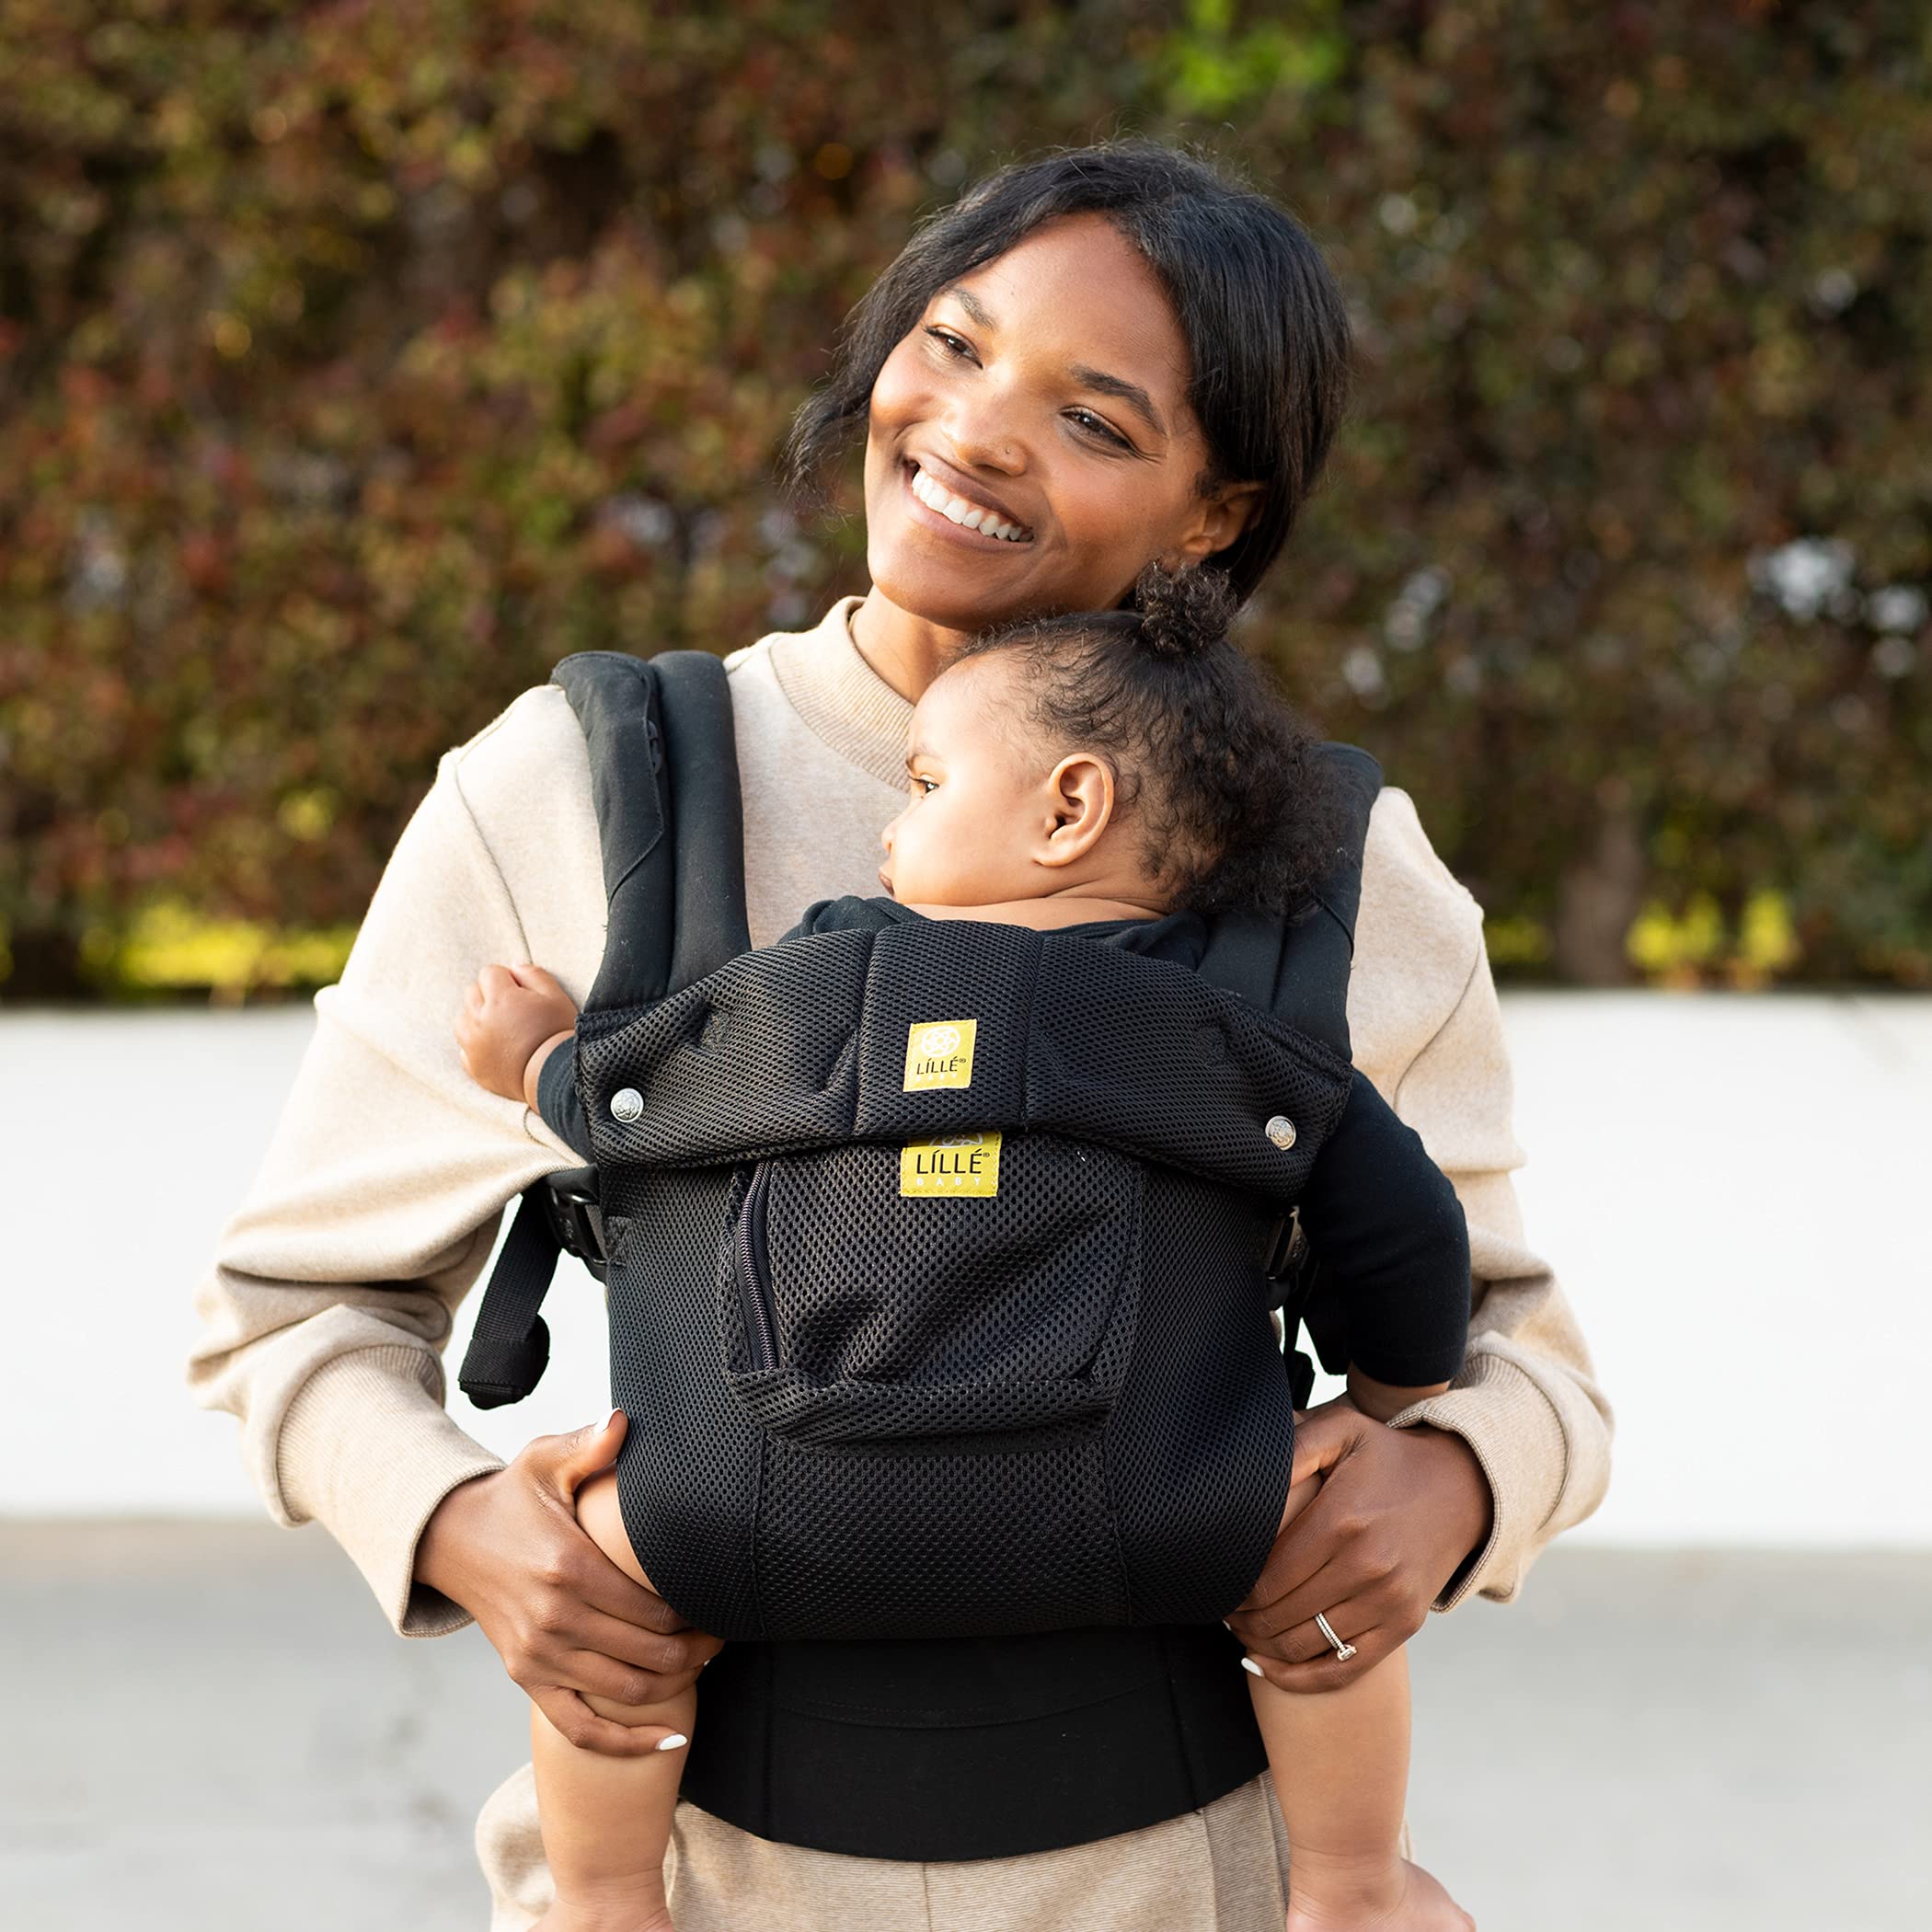 LÍLLÉbaby Complete Airflow Ergonomic 6-in-1 Baby Carrier Newborn to Toddler - with Lumbar Support - for Children 7-45 Pounds - 360 Degree Baby Wearing - Inward and Outward Facing - Black